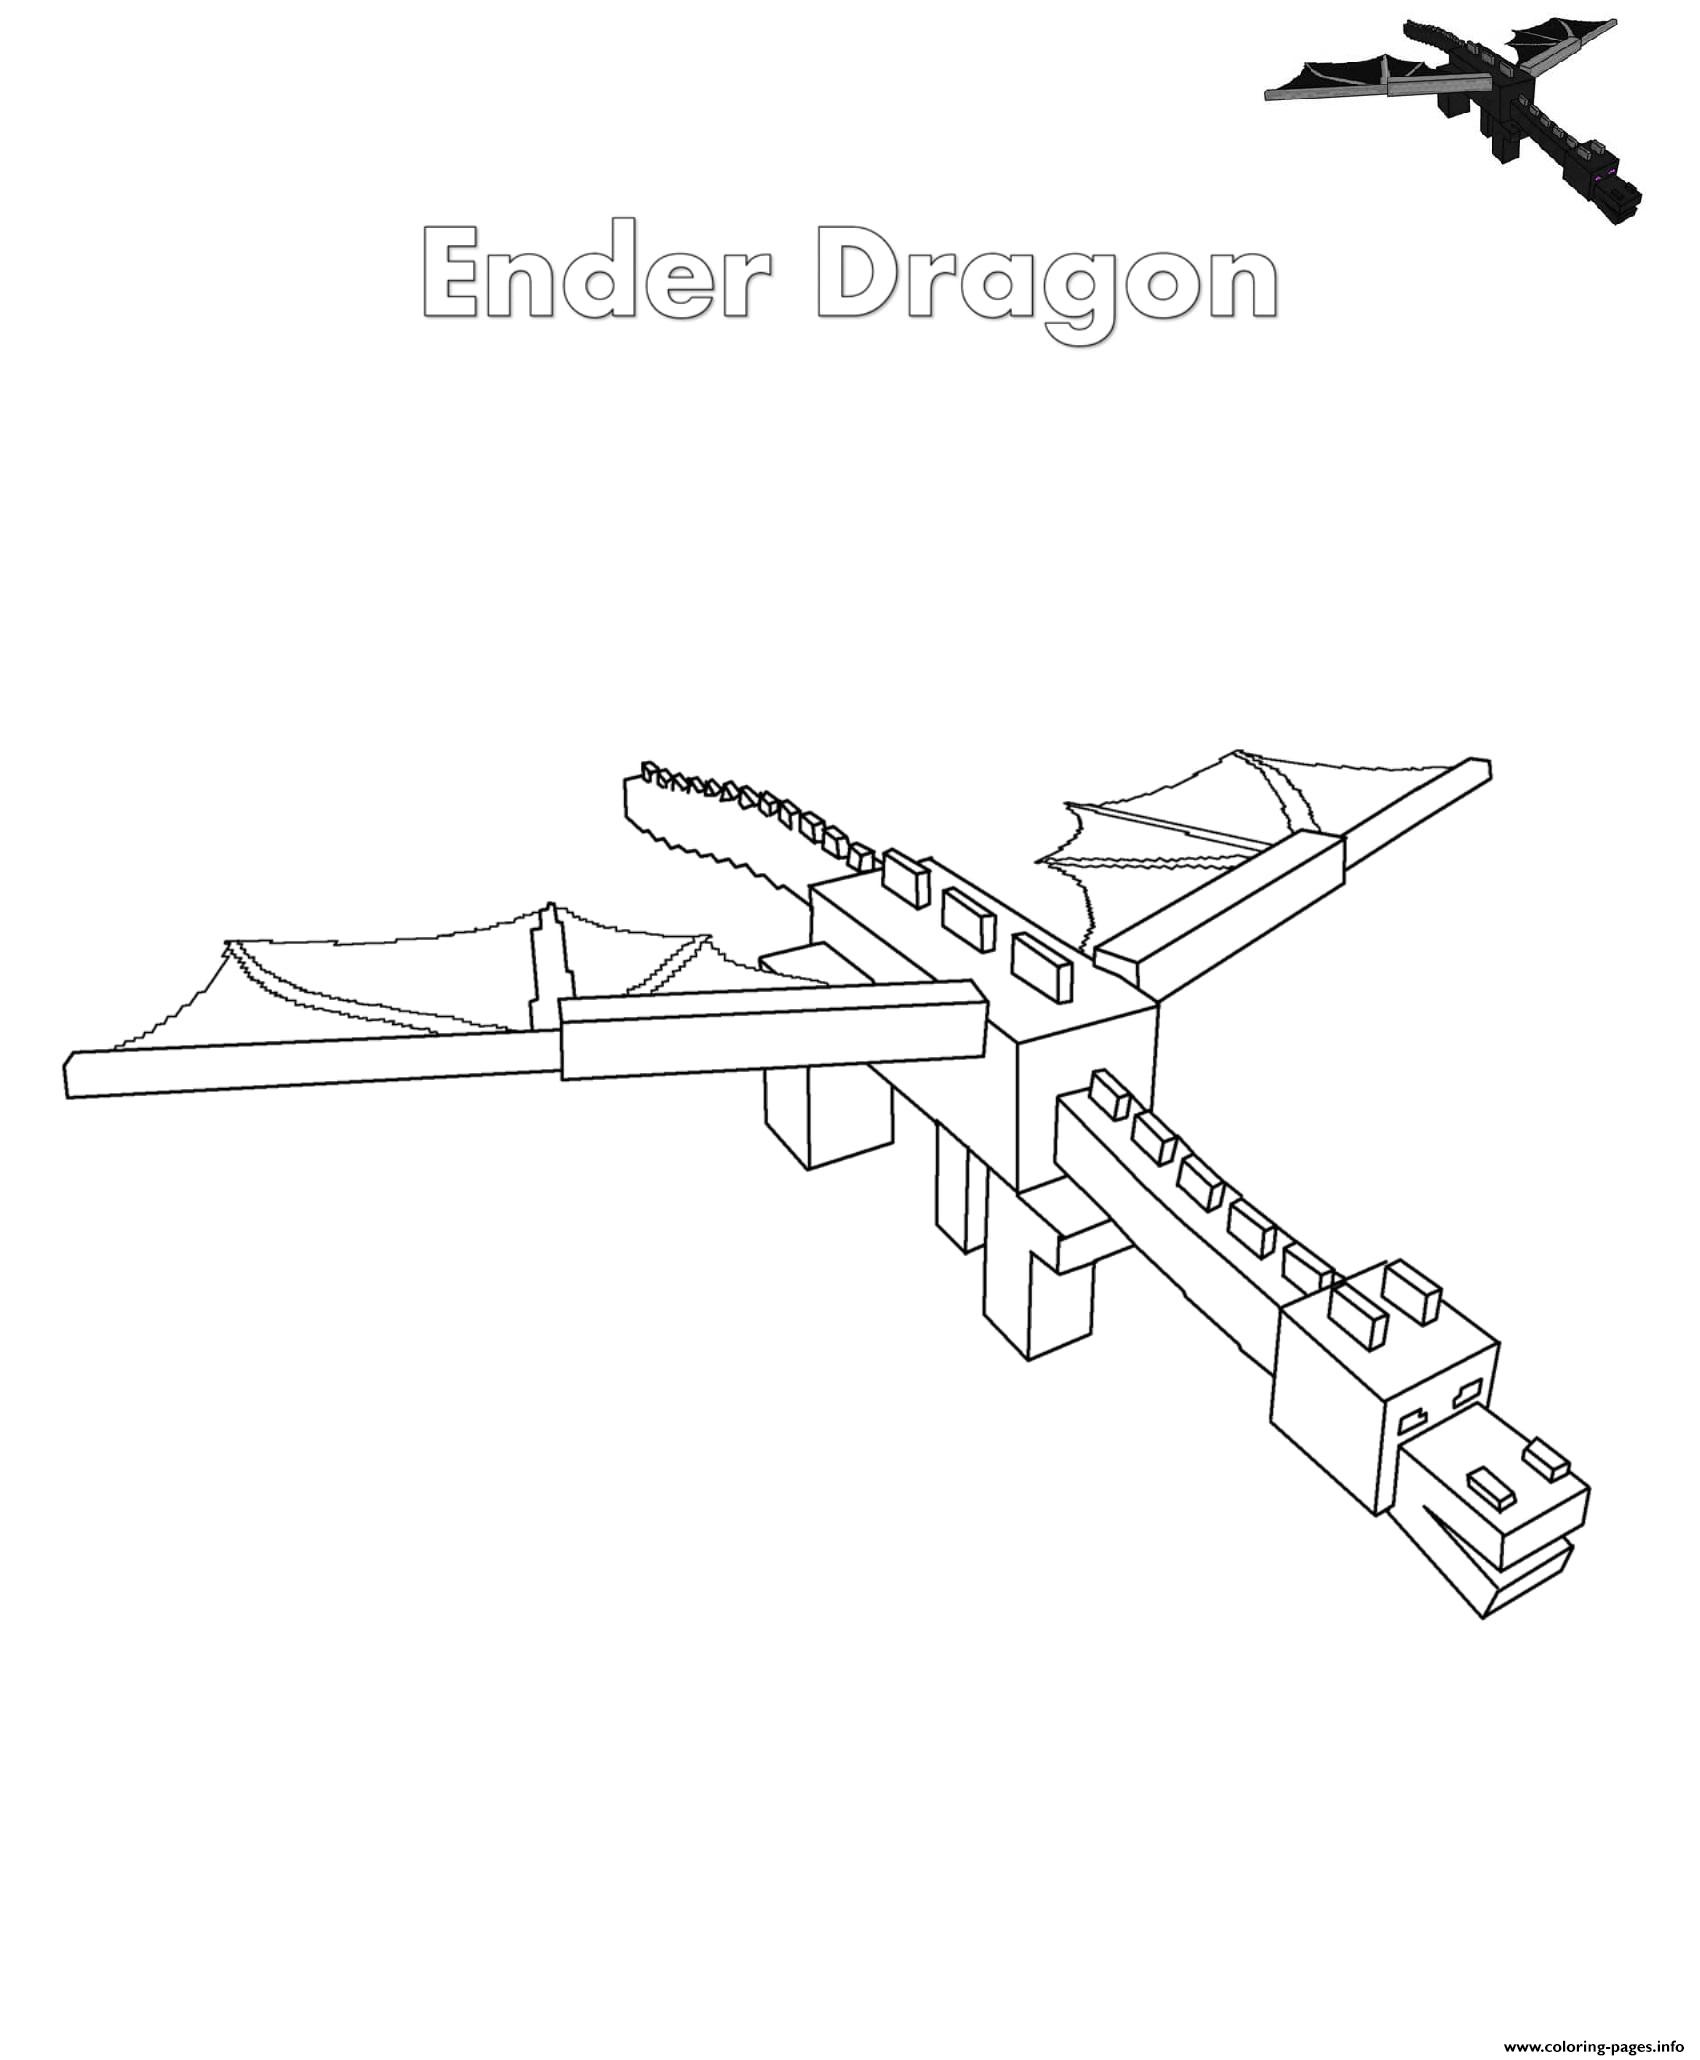 Ender Dragon Minecraft coloring pages